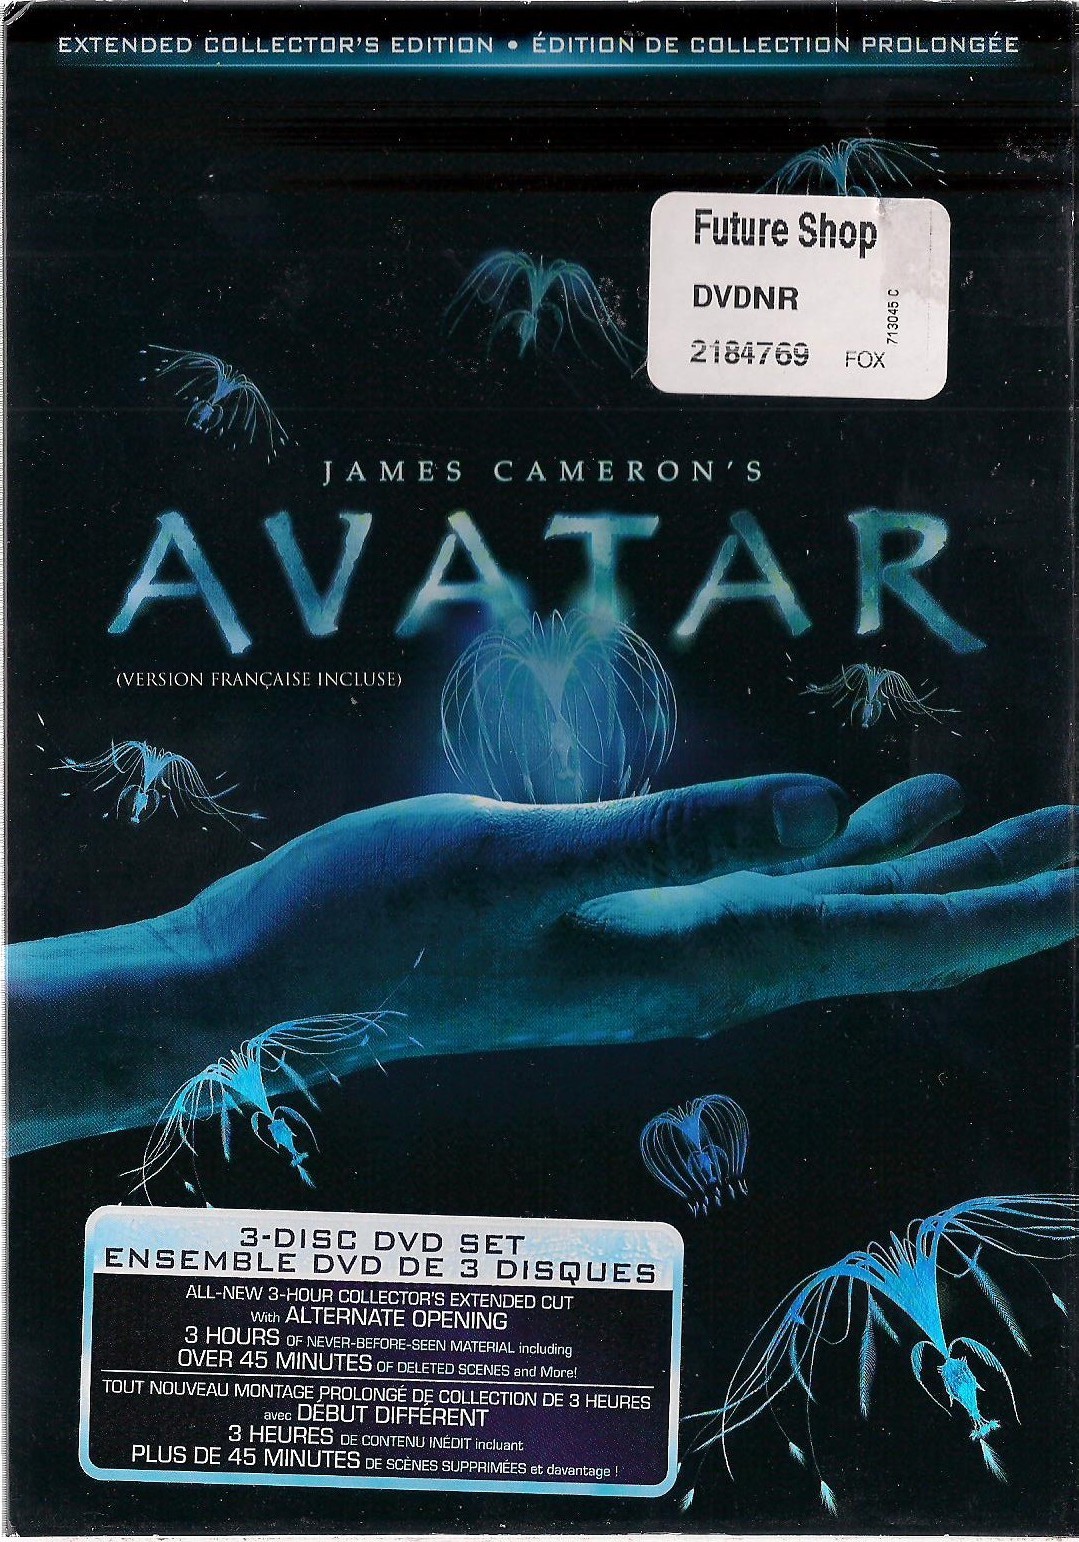 Primary image for Avatar Extended Collector's Edition (3 Disc DVD Set) (Region Free) SEALED & ORIG